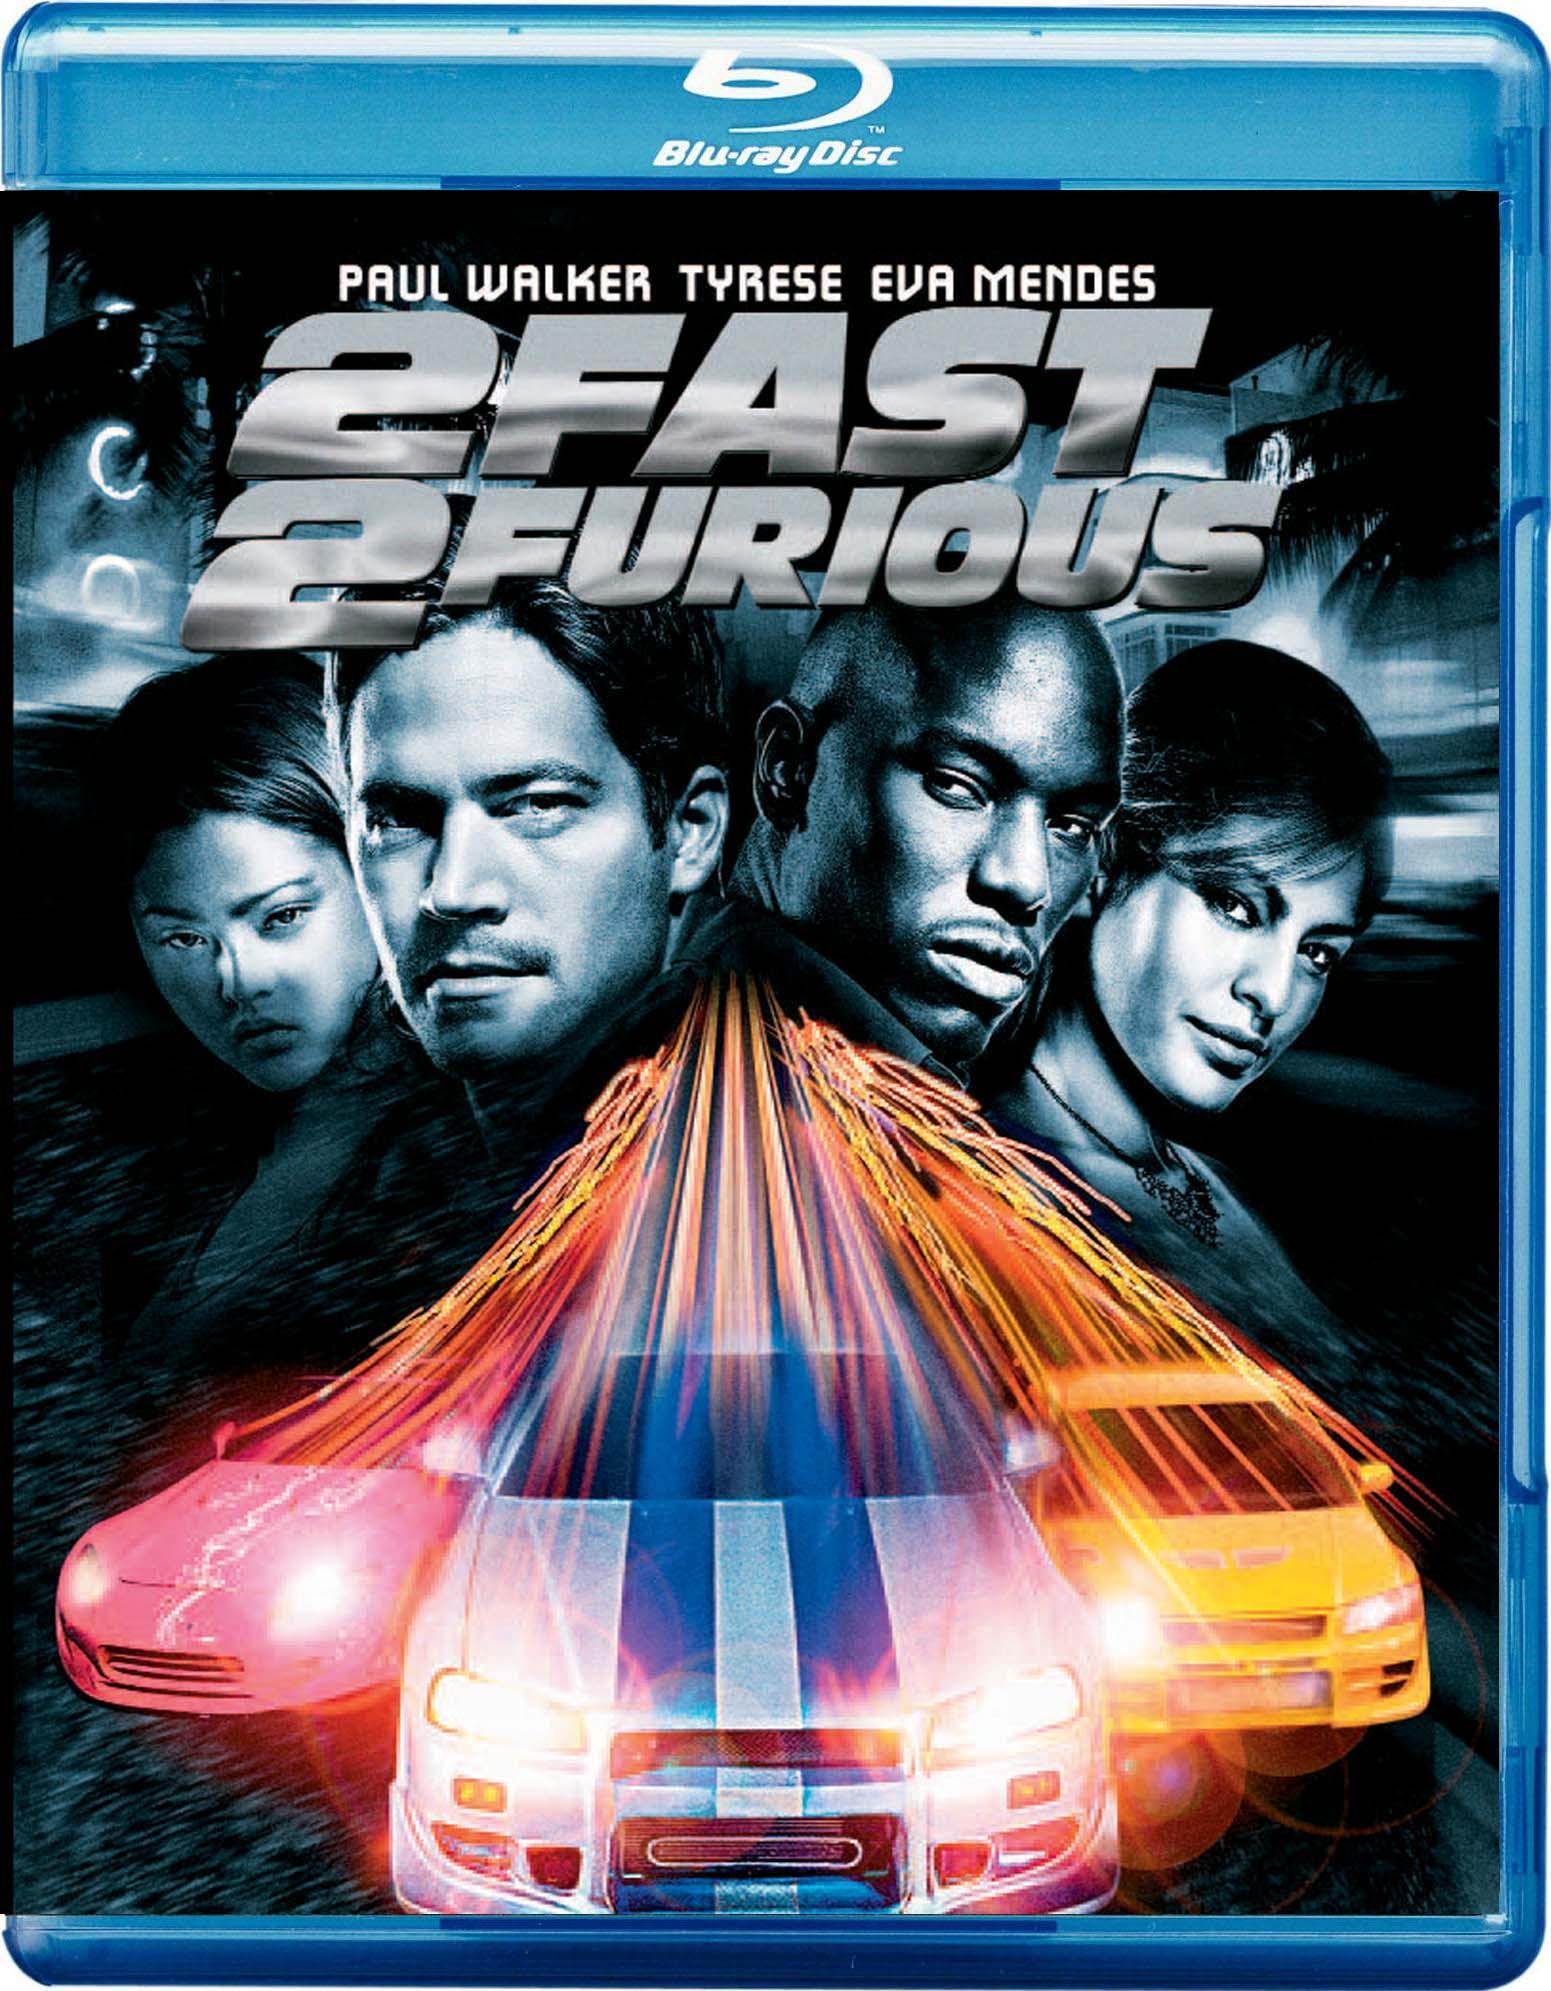 2 fast 2 furious download